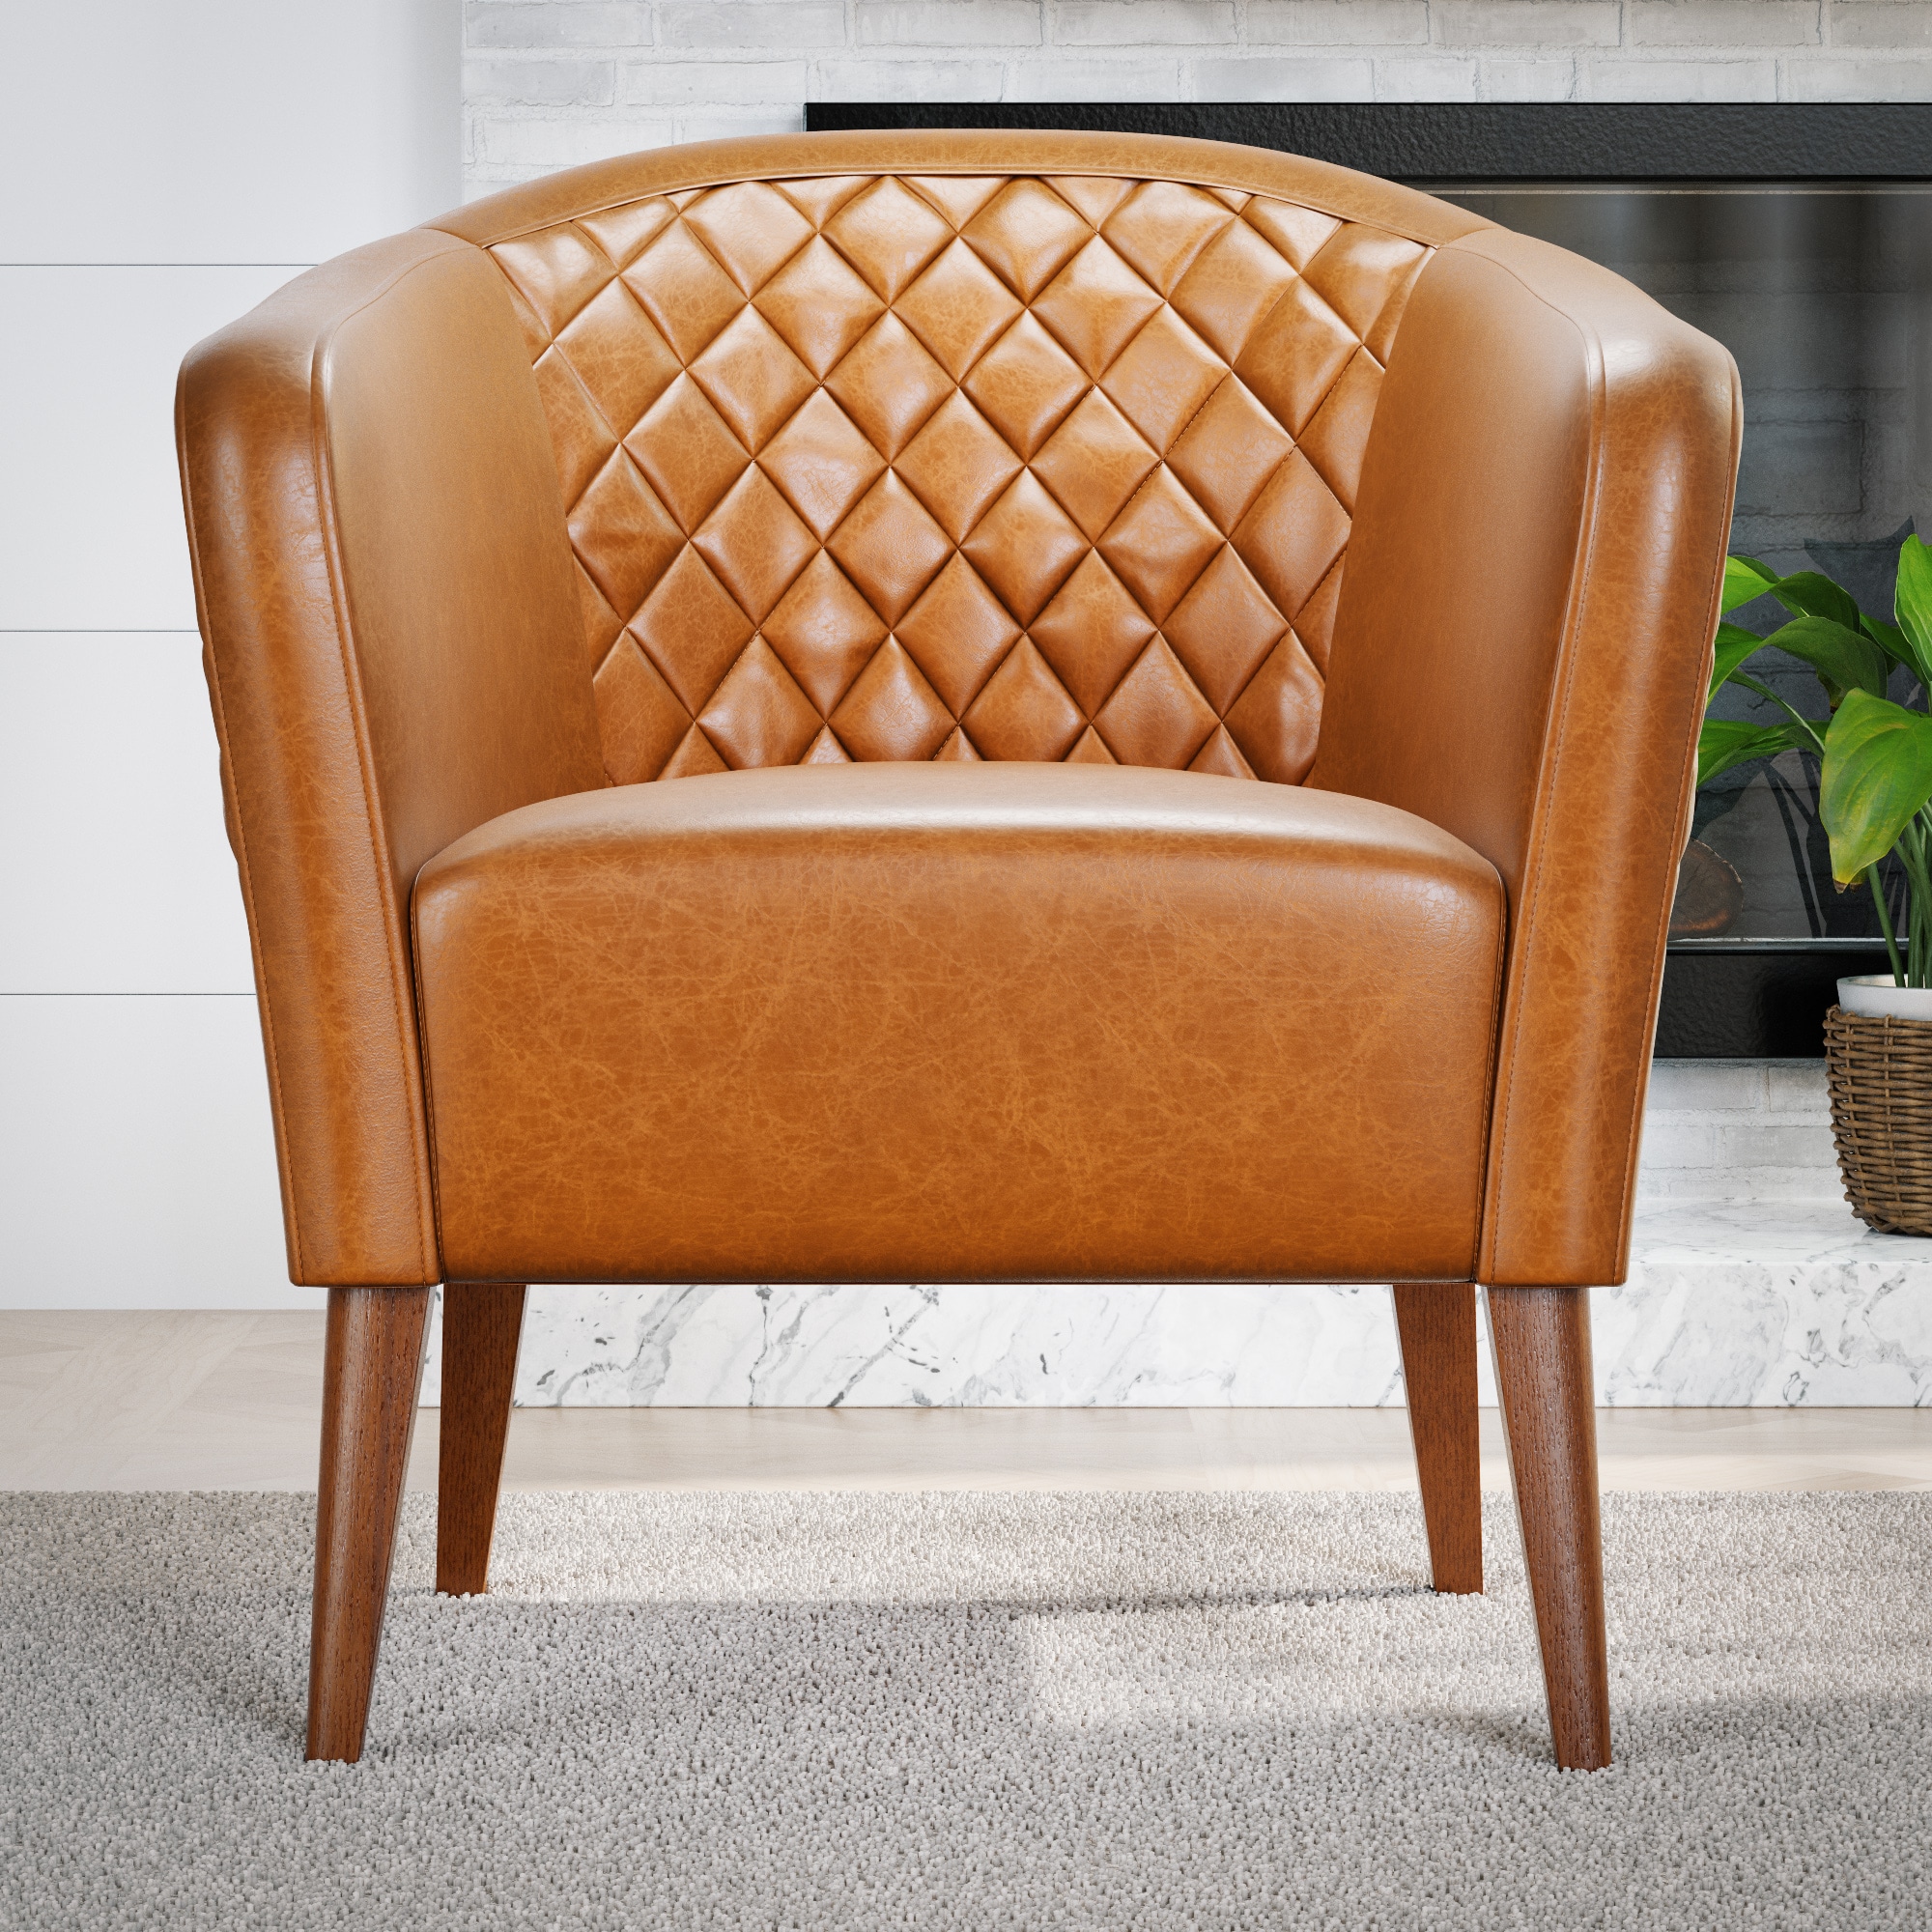 Brookside Vera Faux Leather Barrel, Cool Leather Accent Chairs